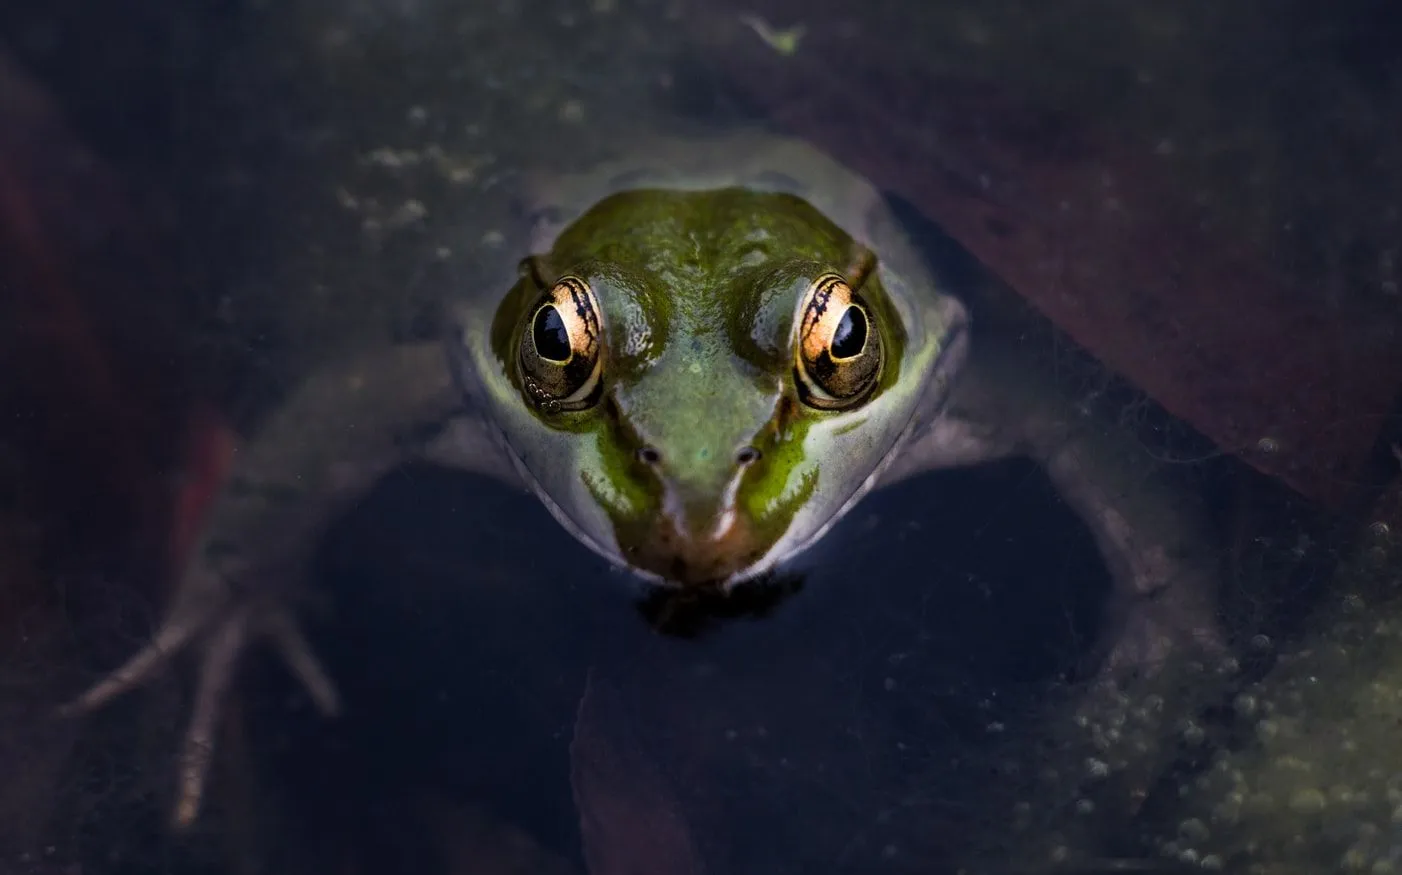 Goliath frogs are found near fast flowing rivers and waterfalls.